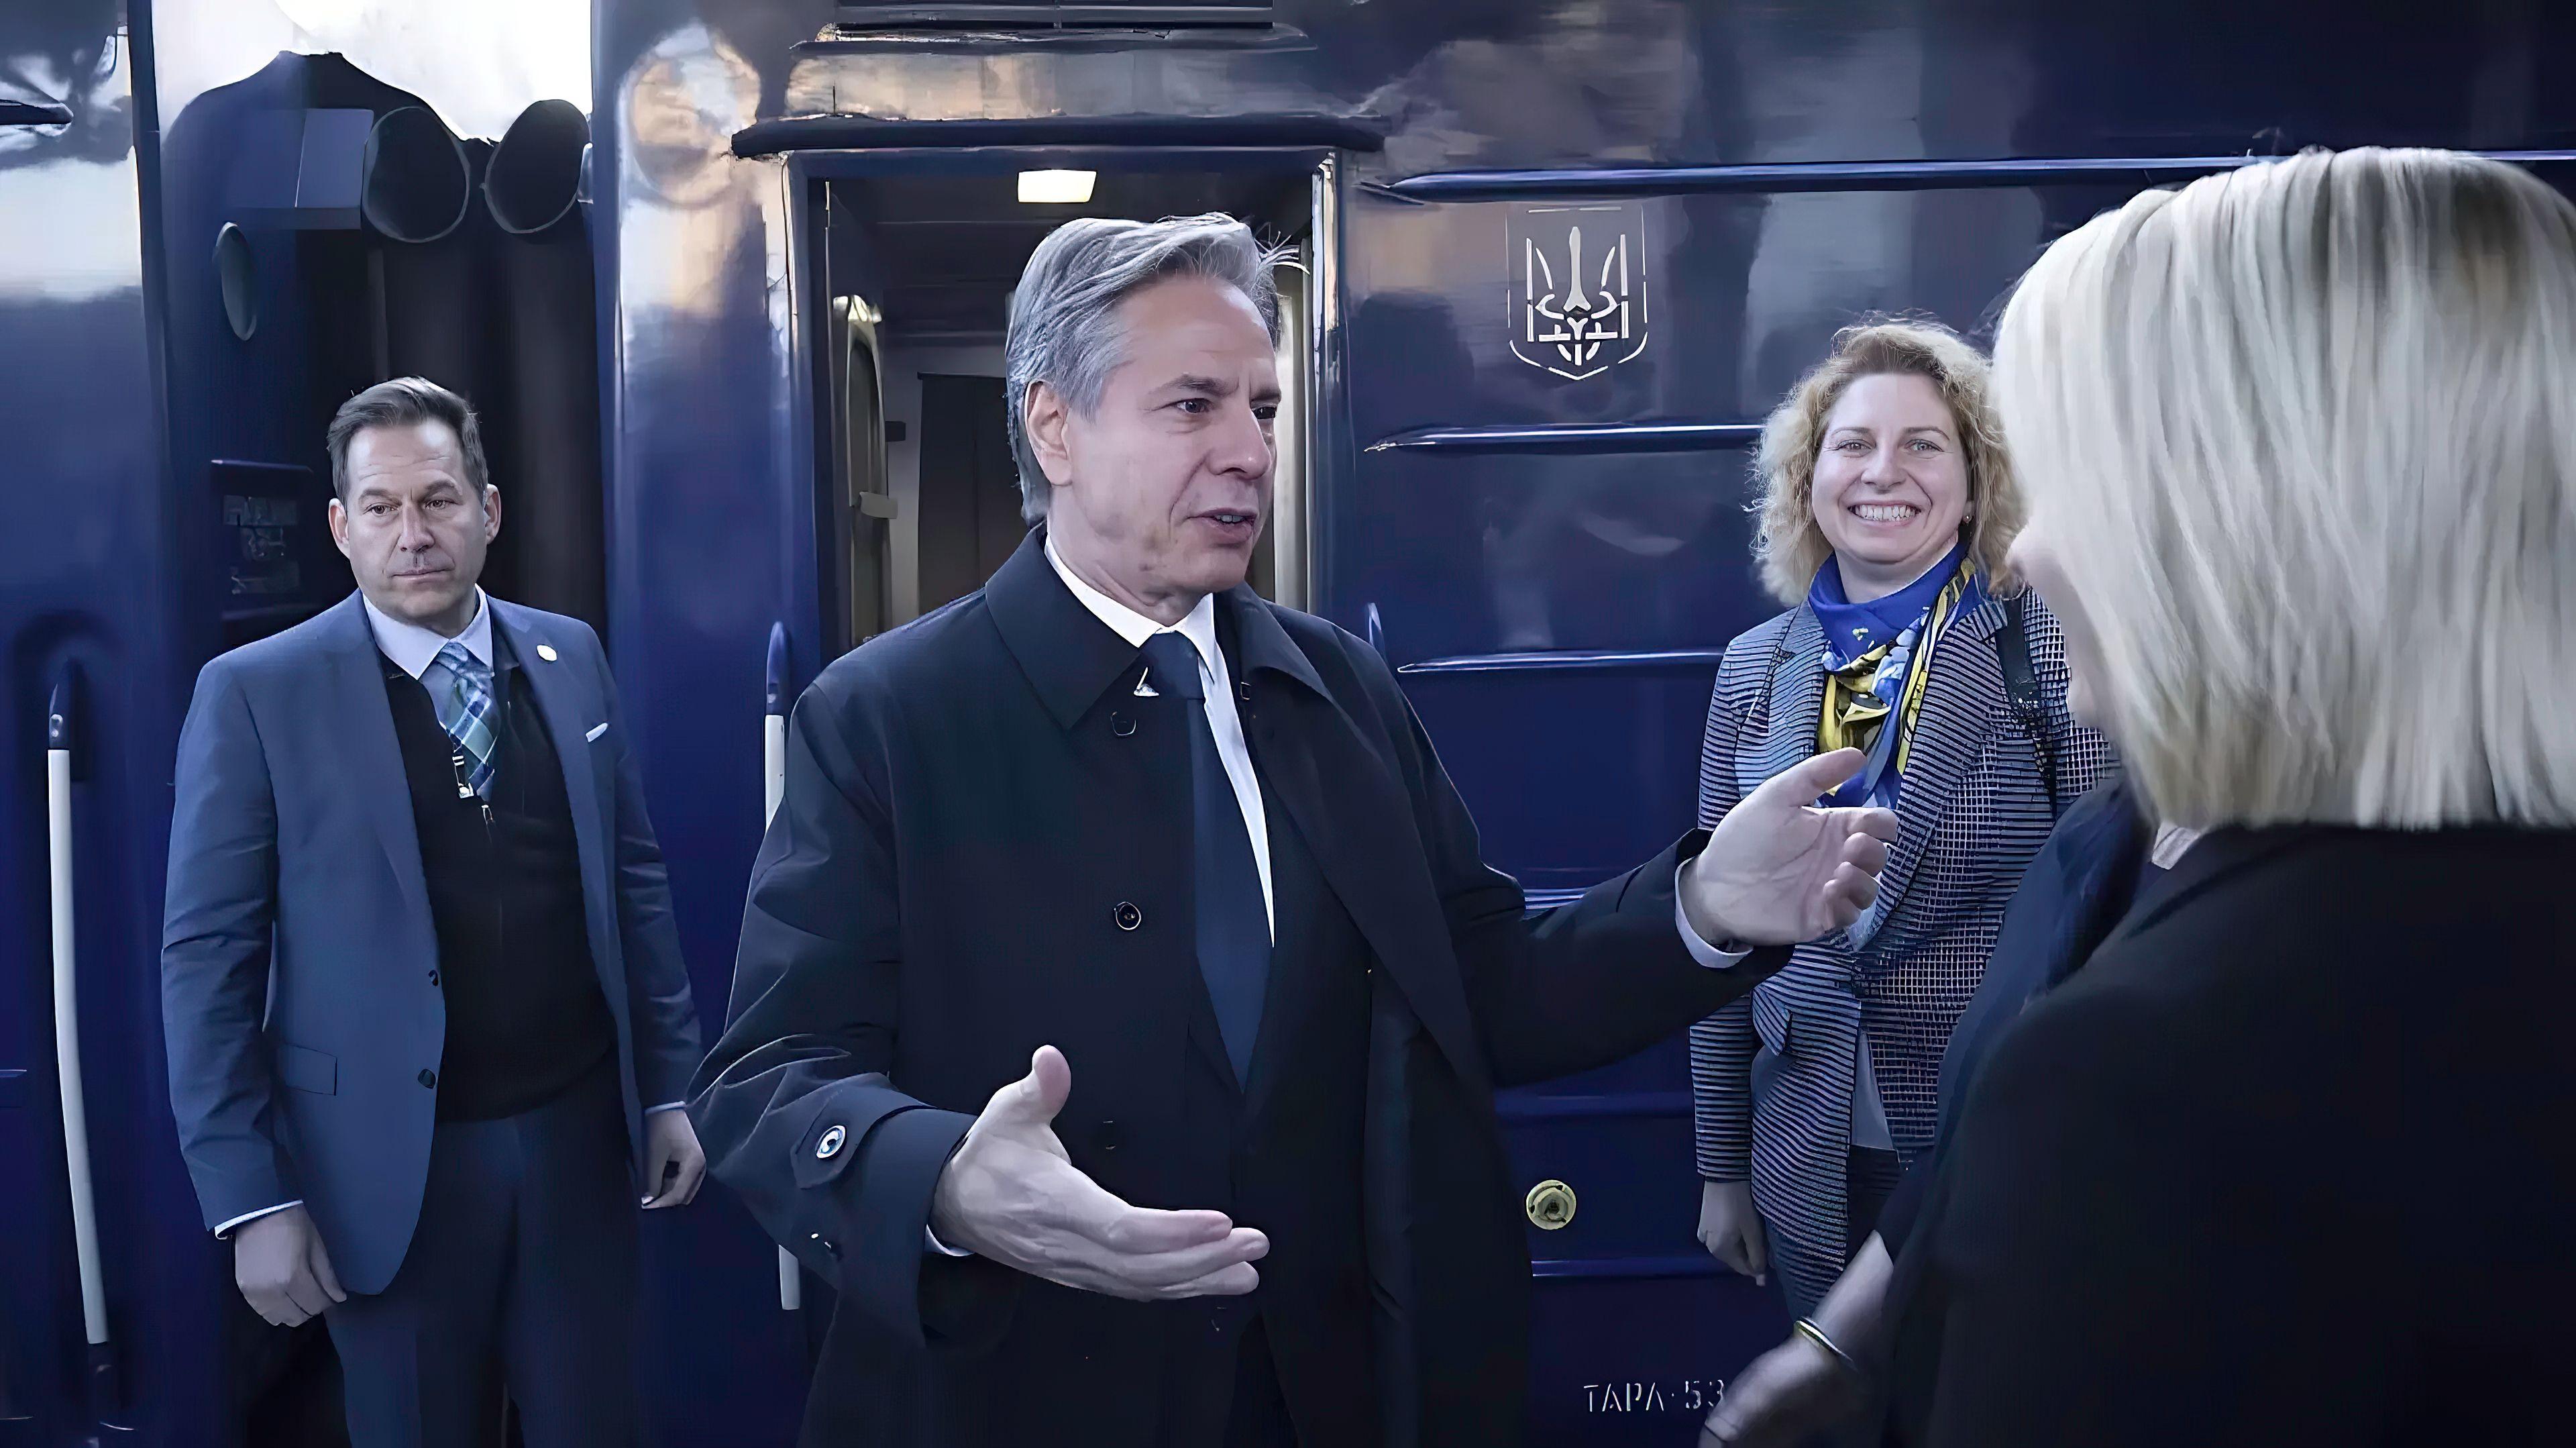 Blinken arrived in Kyiv on an unannounced visit